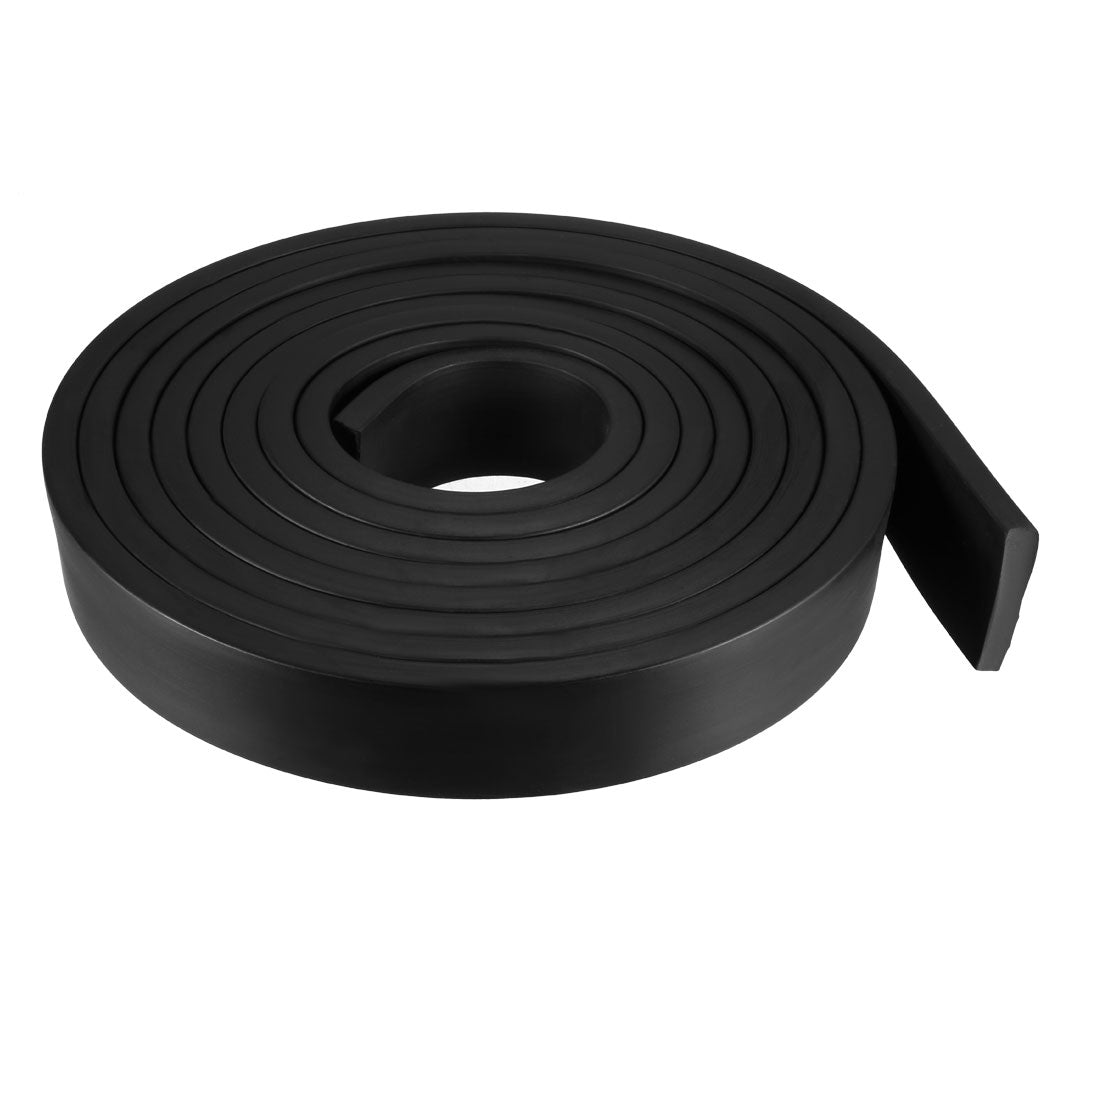 uxcell Uxcell Solid Rectangle Rubber Seal Strip 30mm Wide 7mm Thick, 3 Meters Long Black